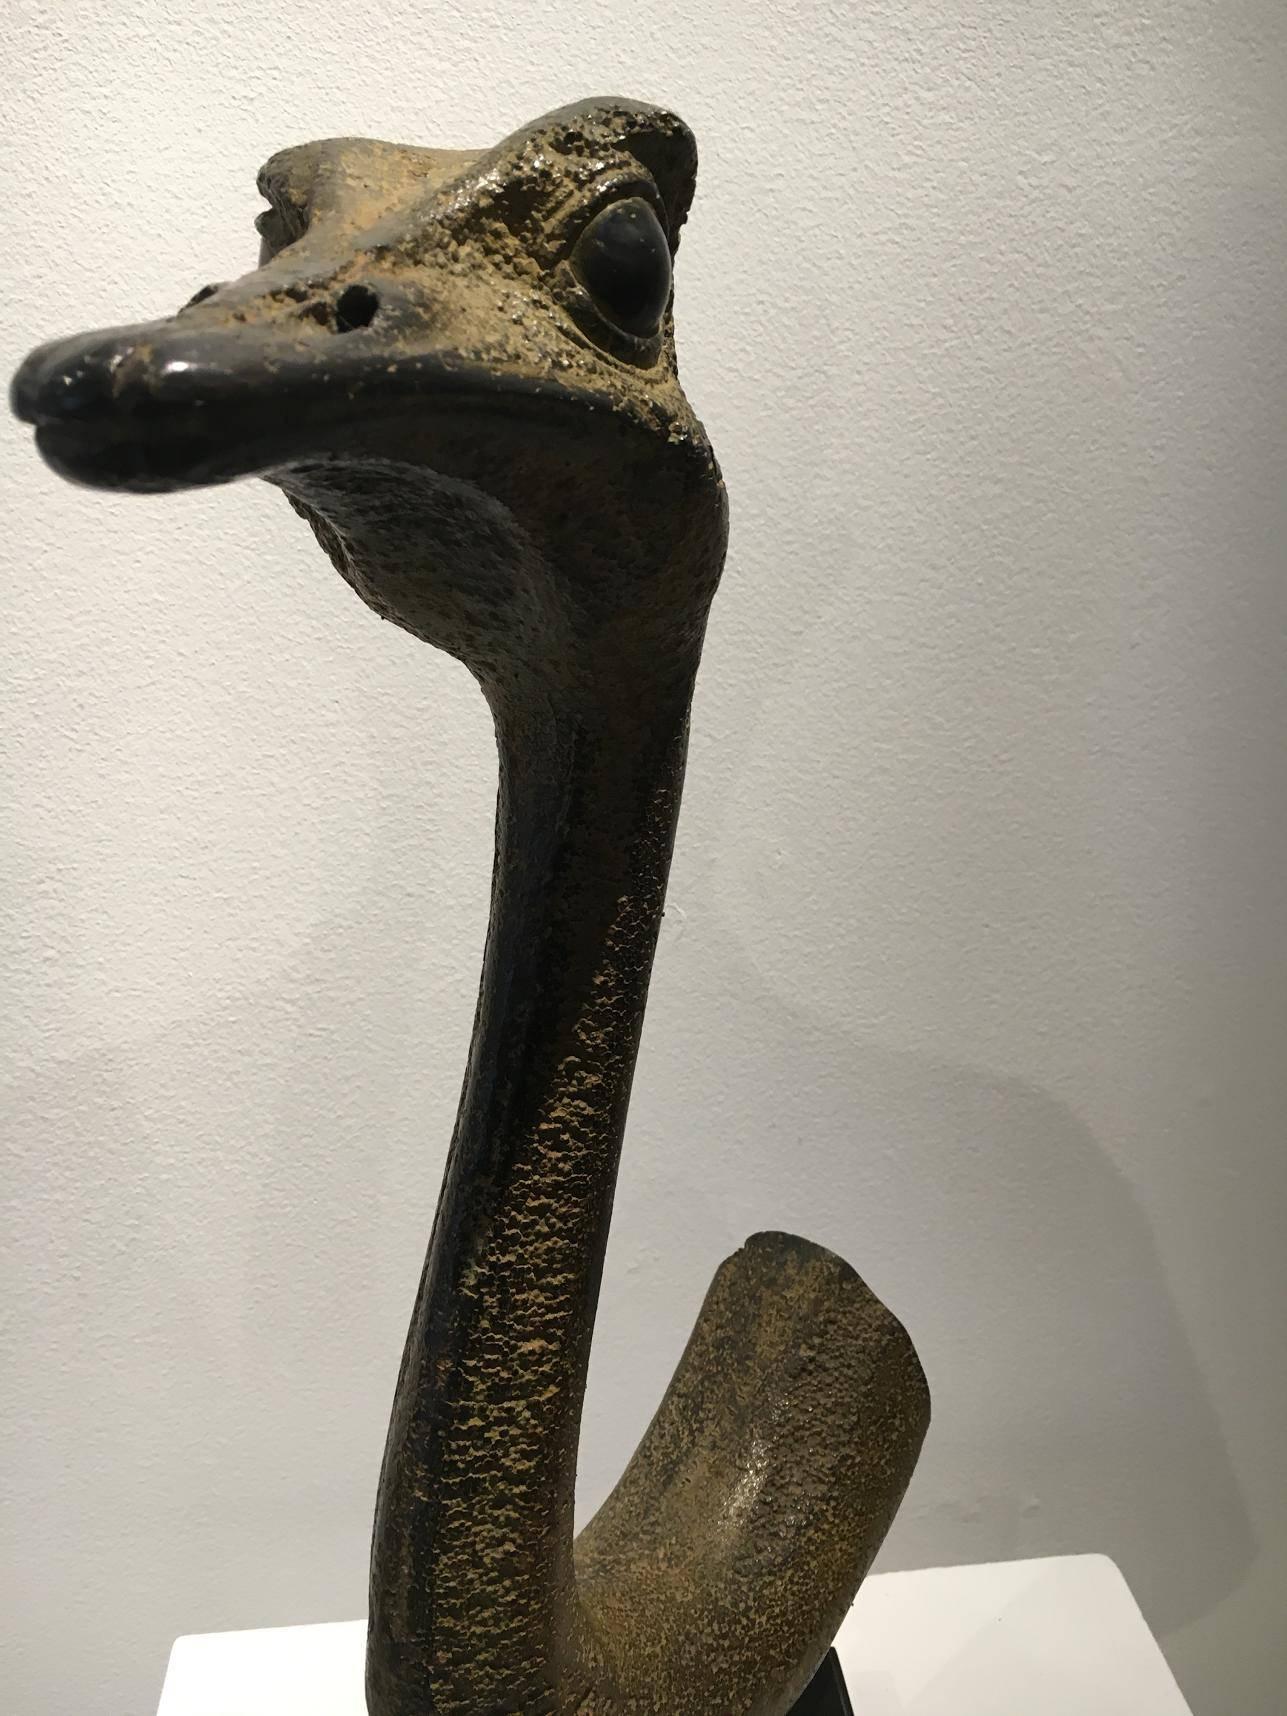 This modern contemporary bronze casting of an ostrich head is simple in its composition, but detailed in every aspect of its rendition.

French sculptor Quentin Garel received 5 prestigious awards for drawing and sculpting between 2001 and 2005 from